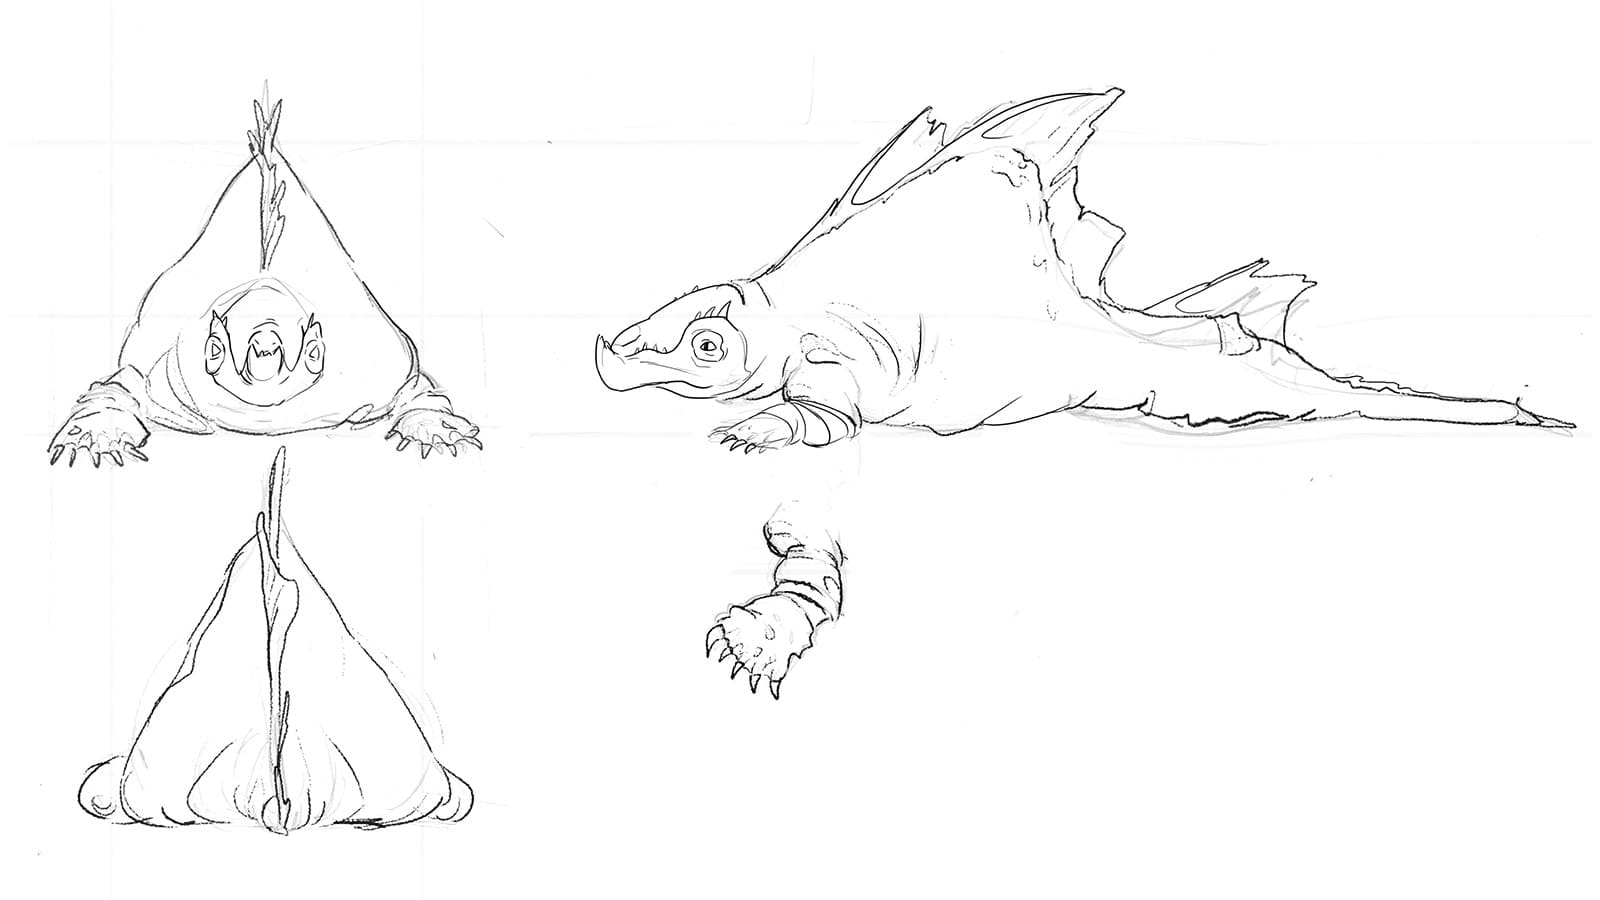 A turnaround of the big monster and a detail of the paw